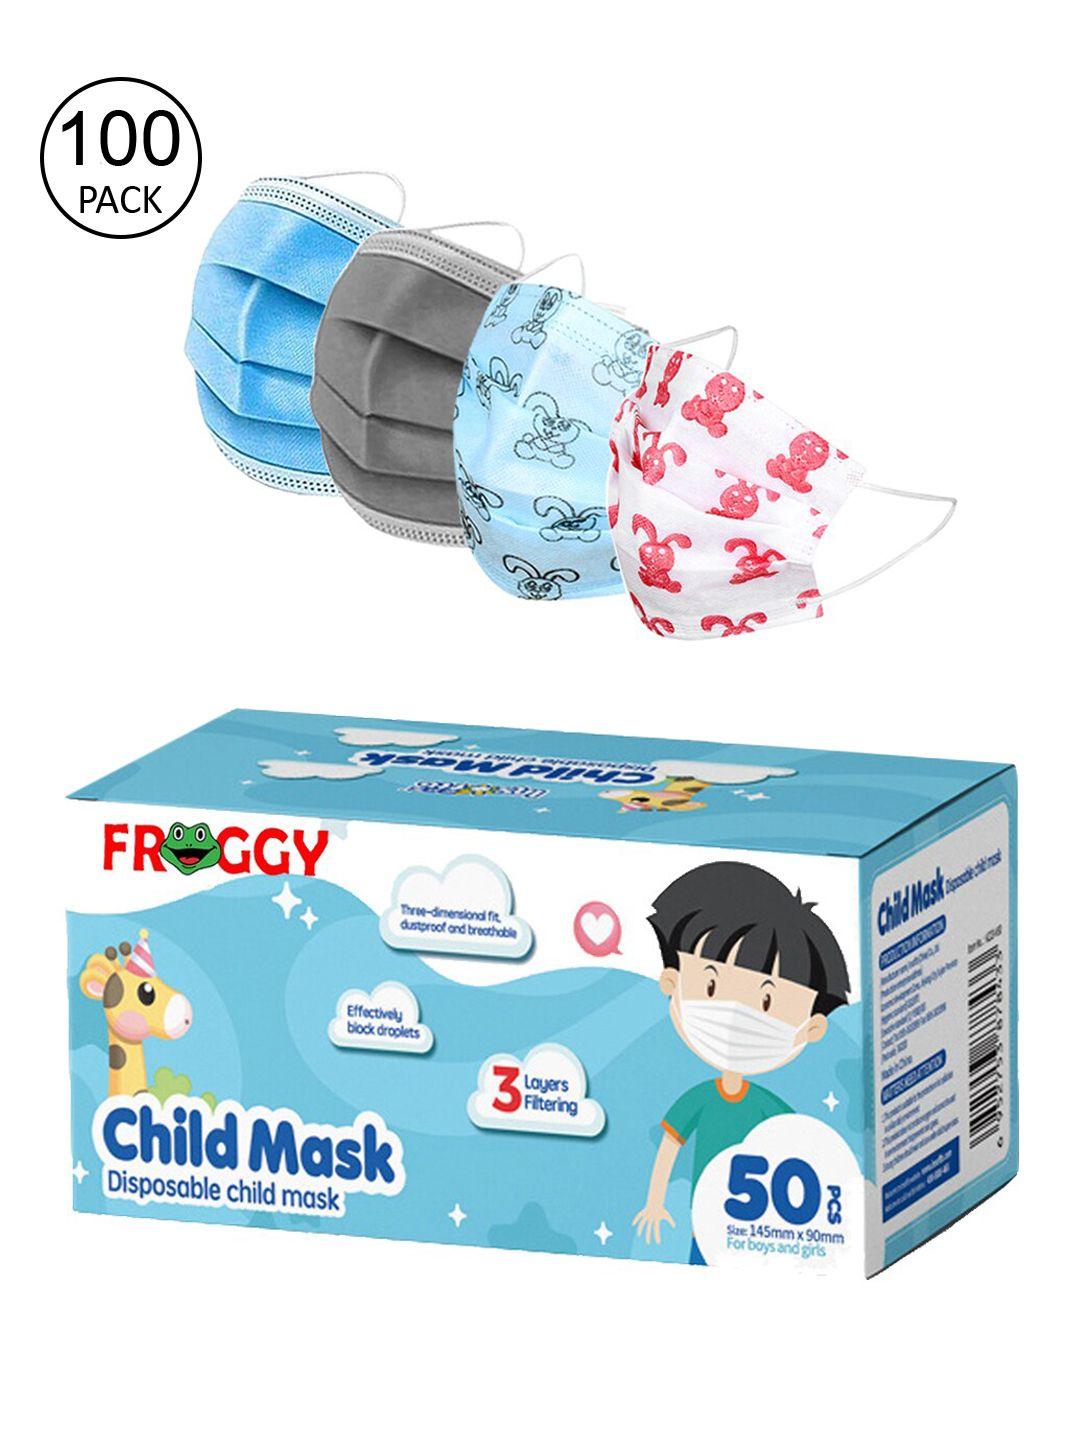 froggy kids set of 100 anti-pollution disposable masks